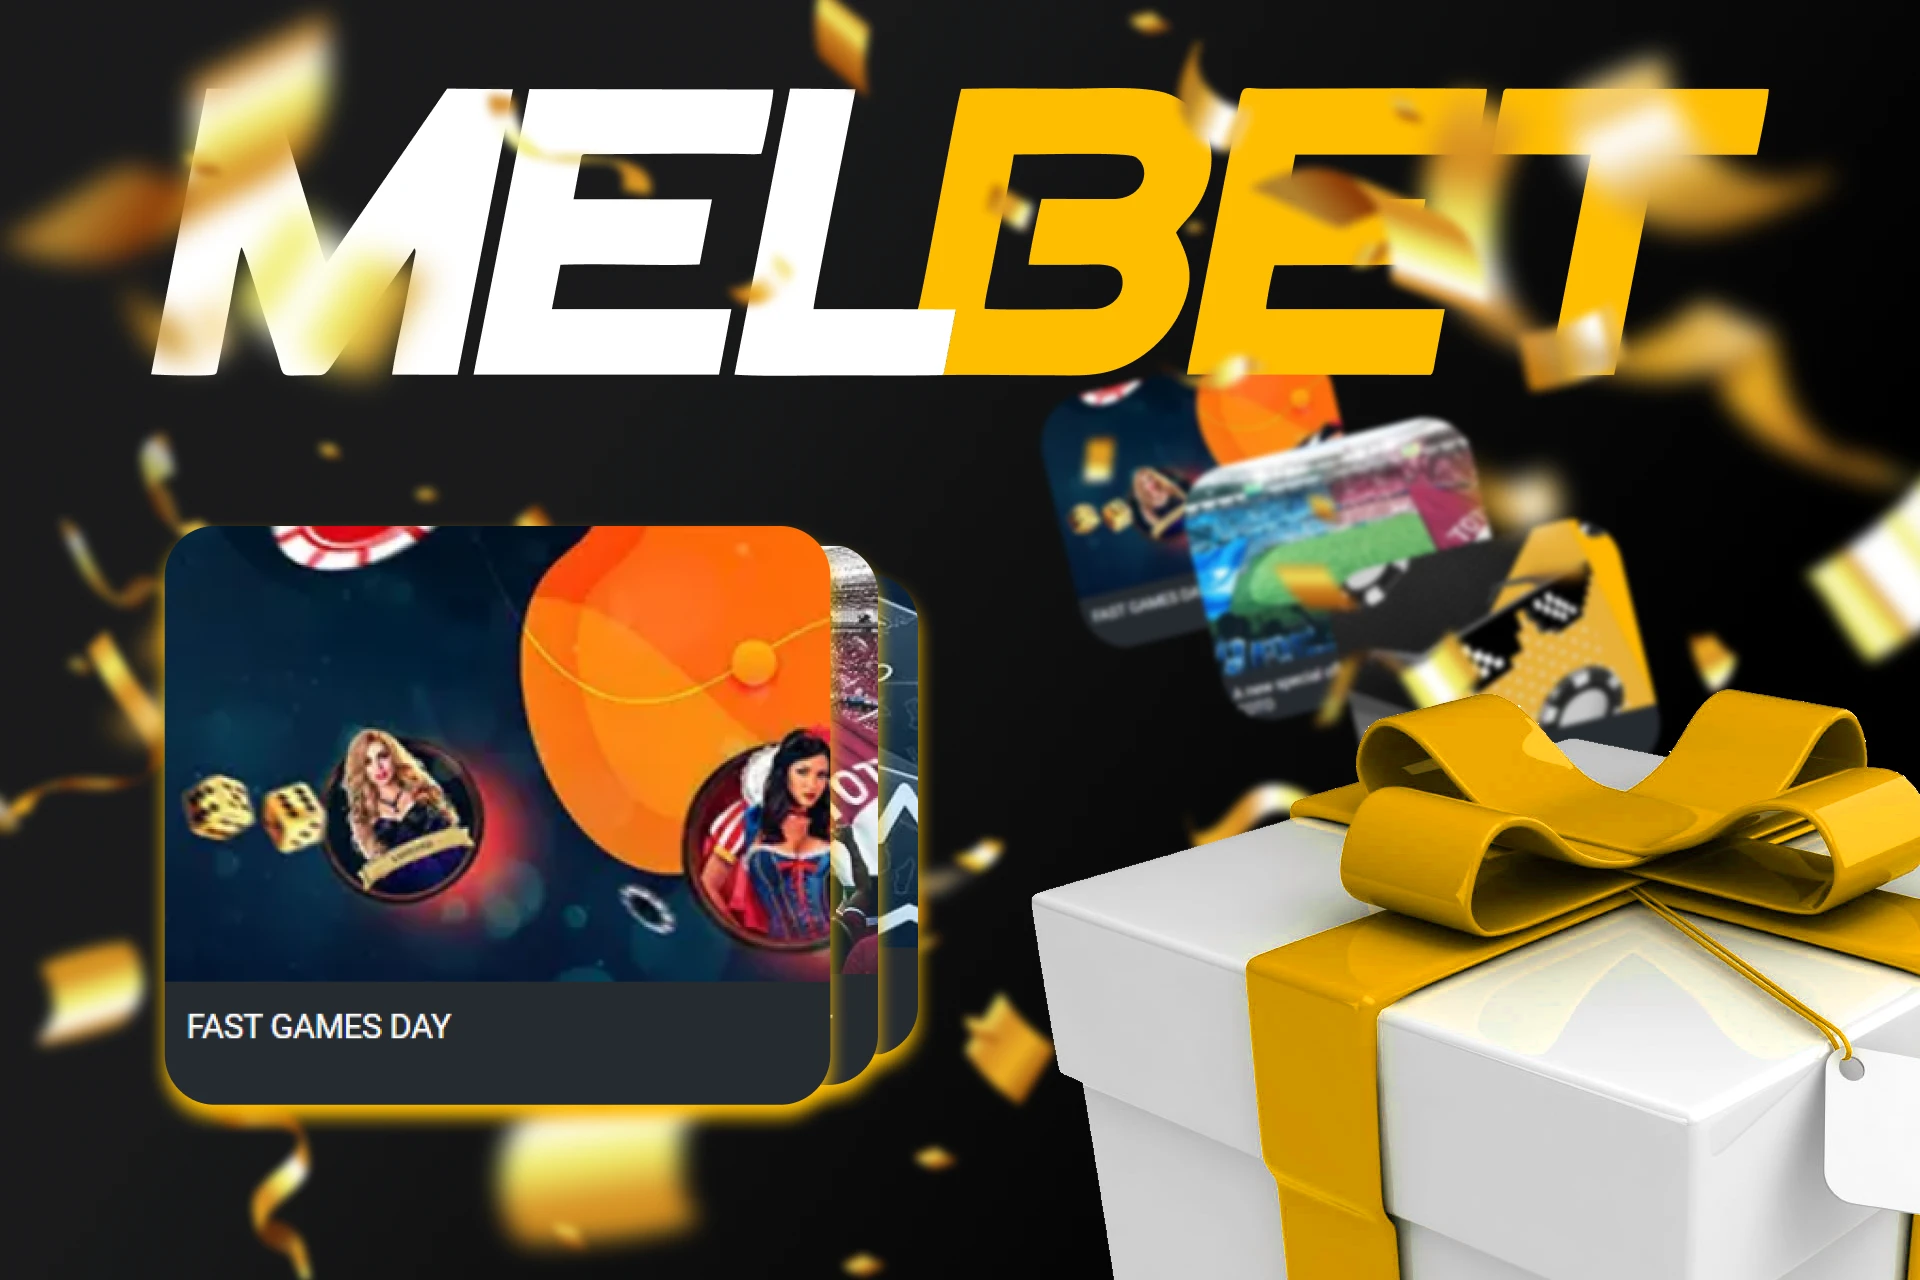 Get Melbet bonus for Fast Games of up to 12,000 BDT and 5 free spins.